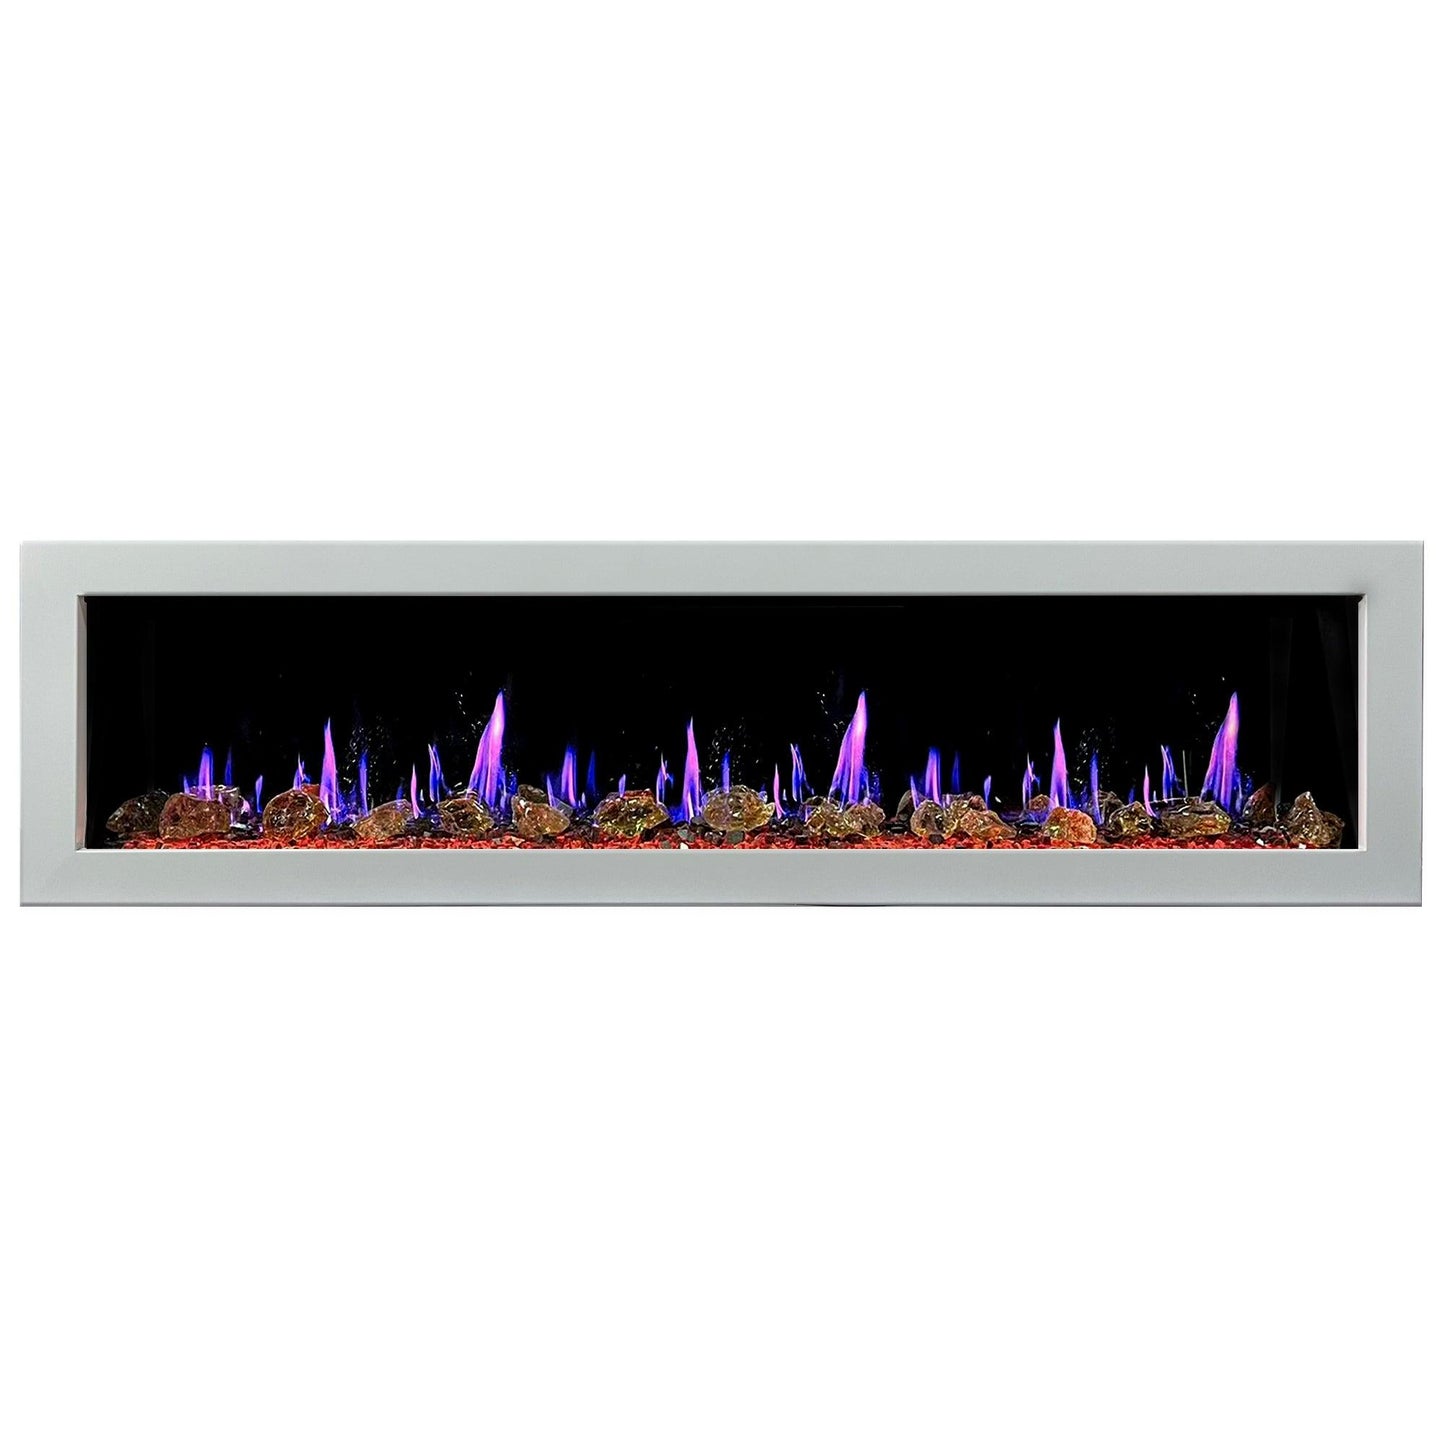 ZopaFlame™ 67" Linear Wall-mount Electric Fireplace - WG17688X - ZopaFlame Fireplaces